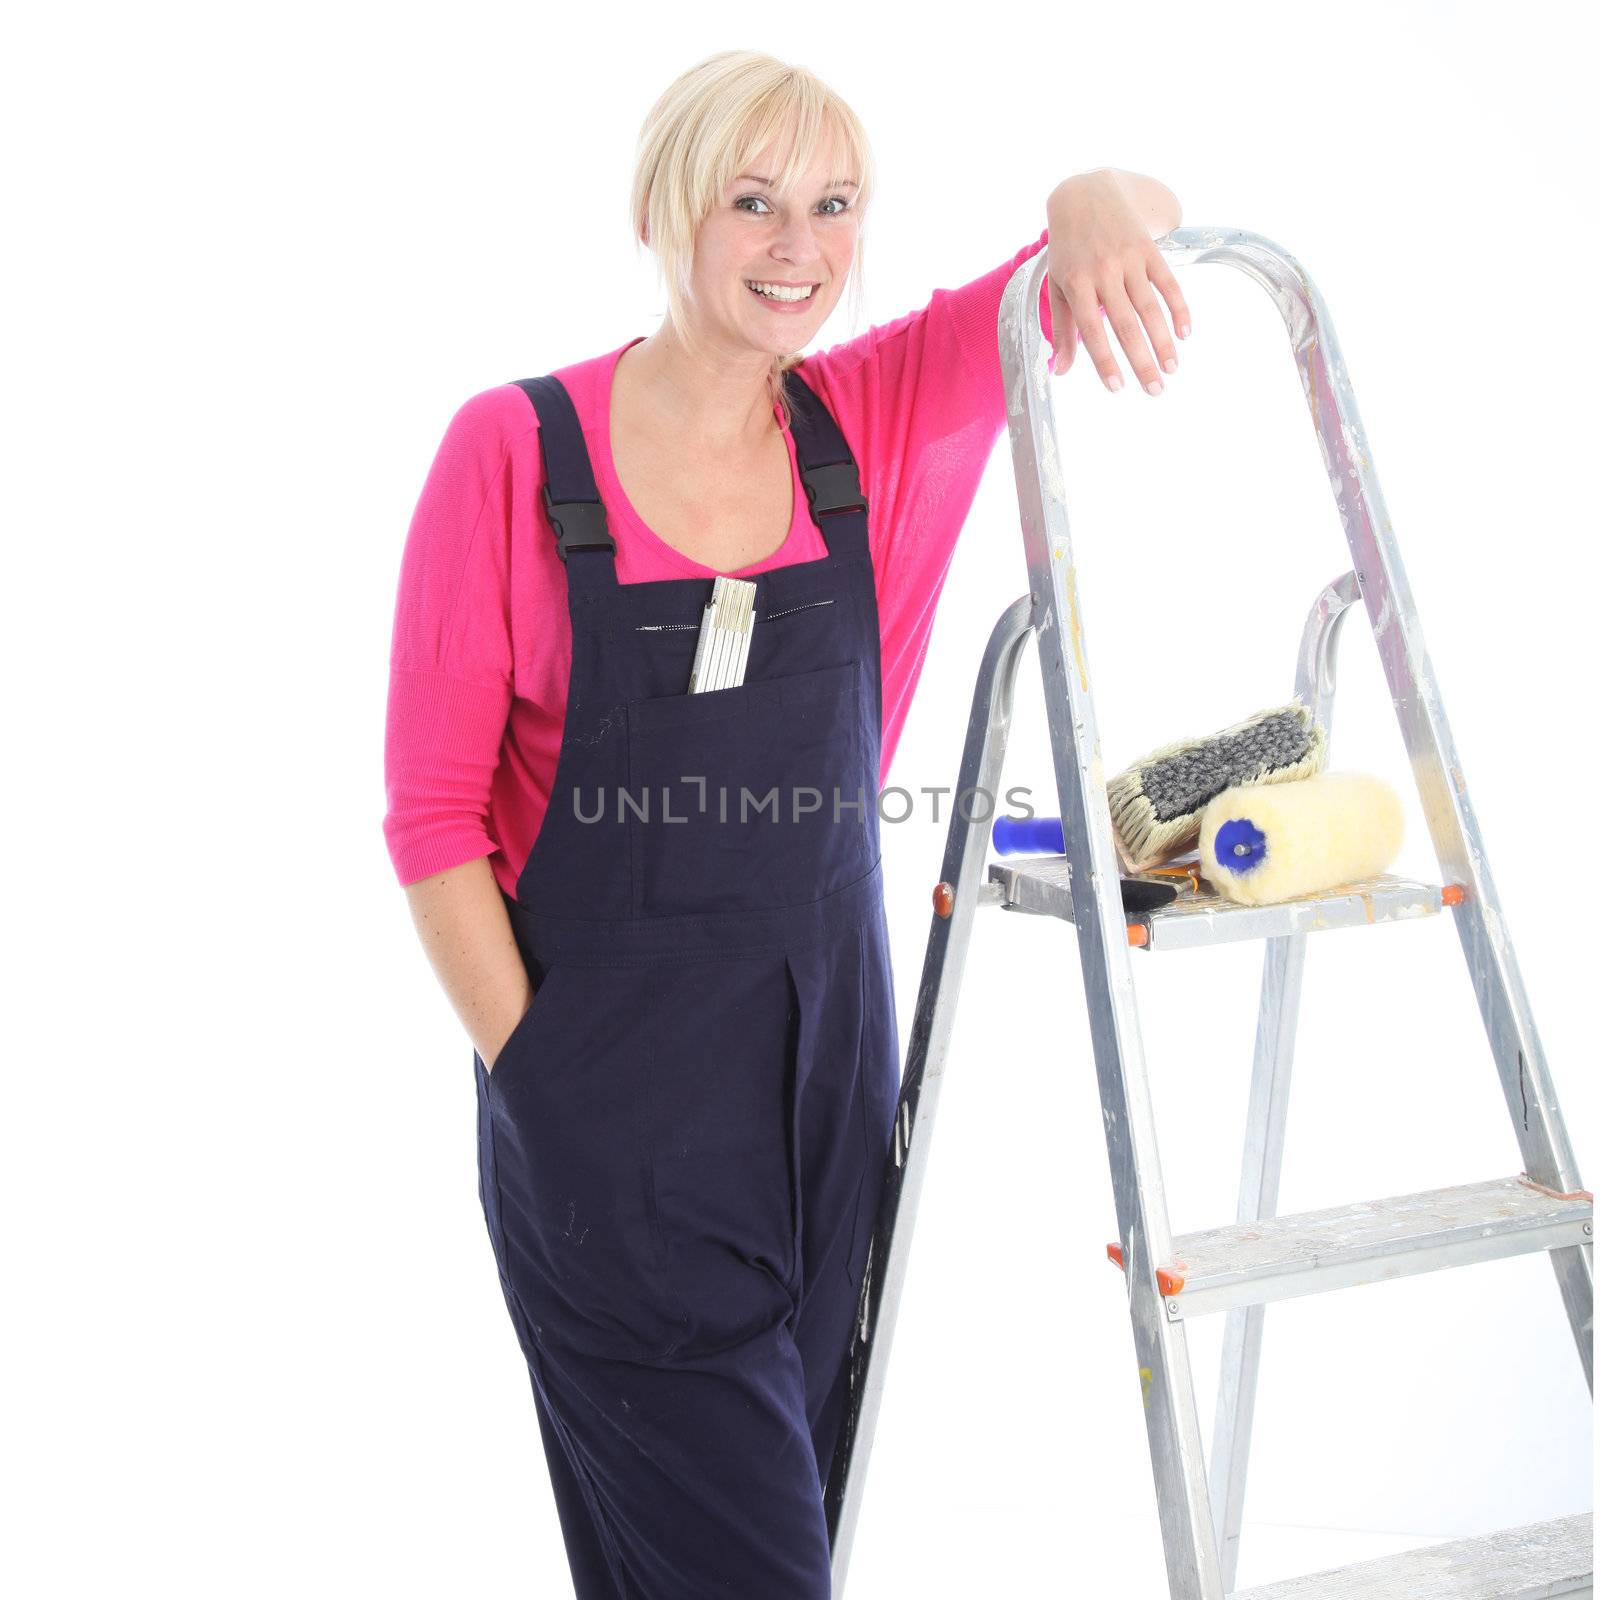 Confident relaxed female decorator by Farina6000